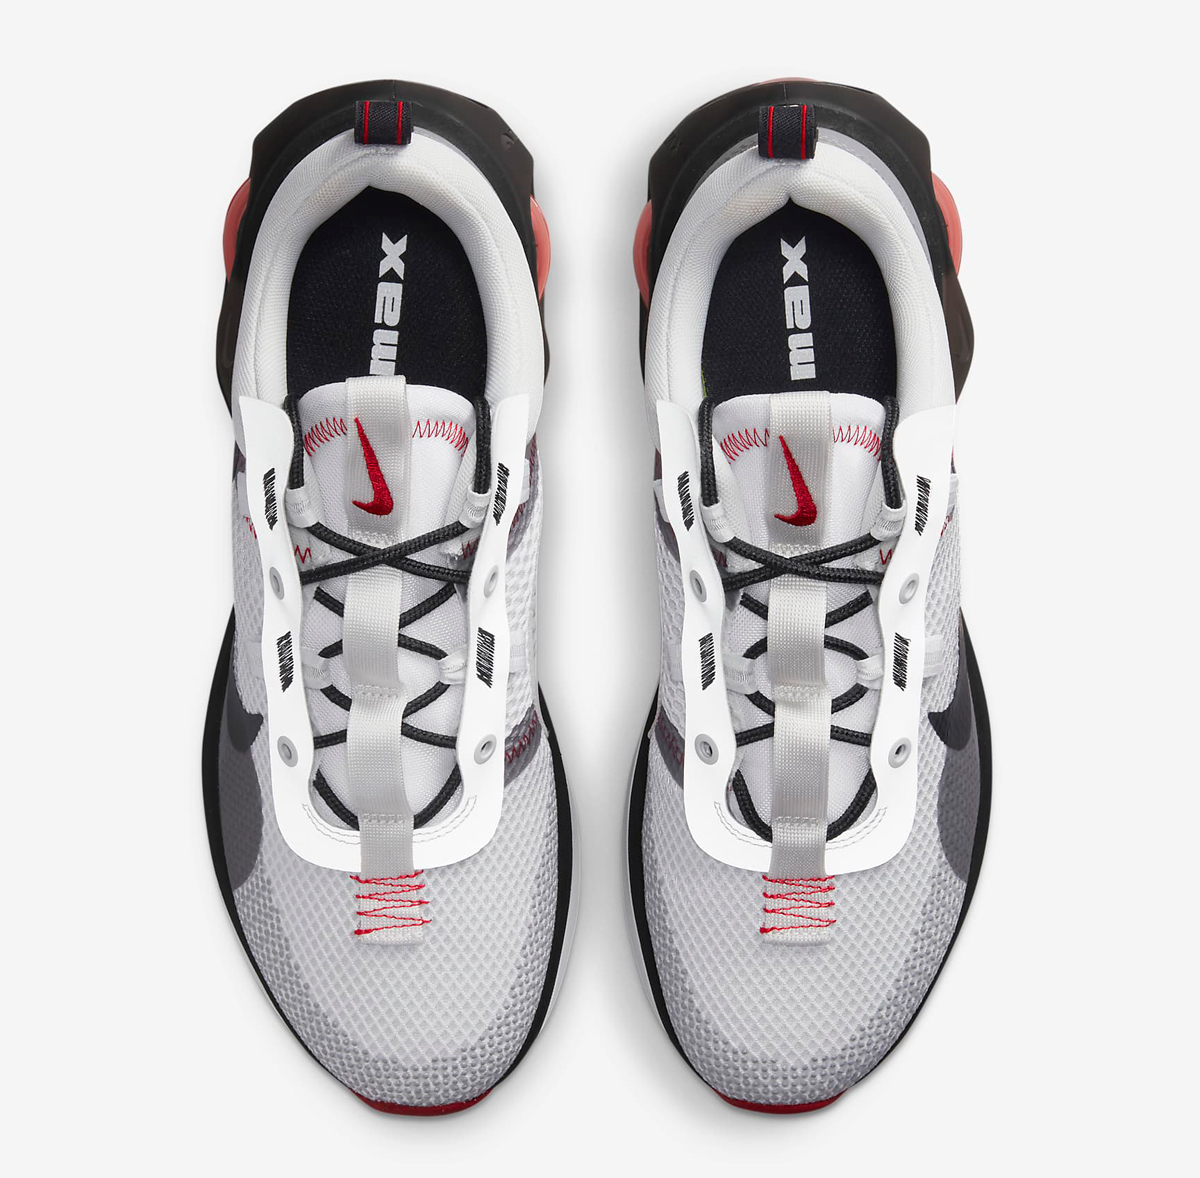 nike-air-max-2021-photon-dust-varsity-red-white-black-release-date-4